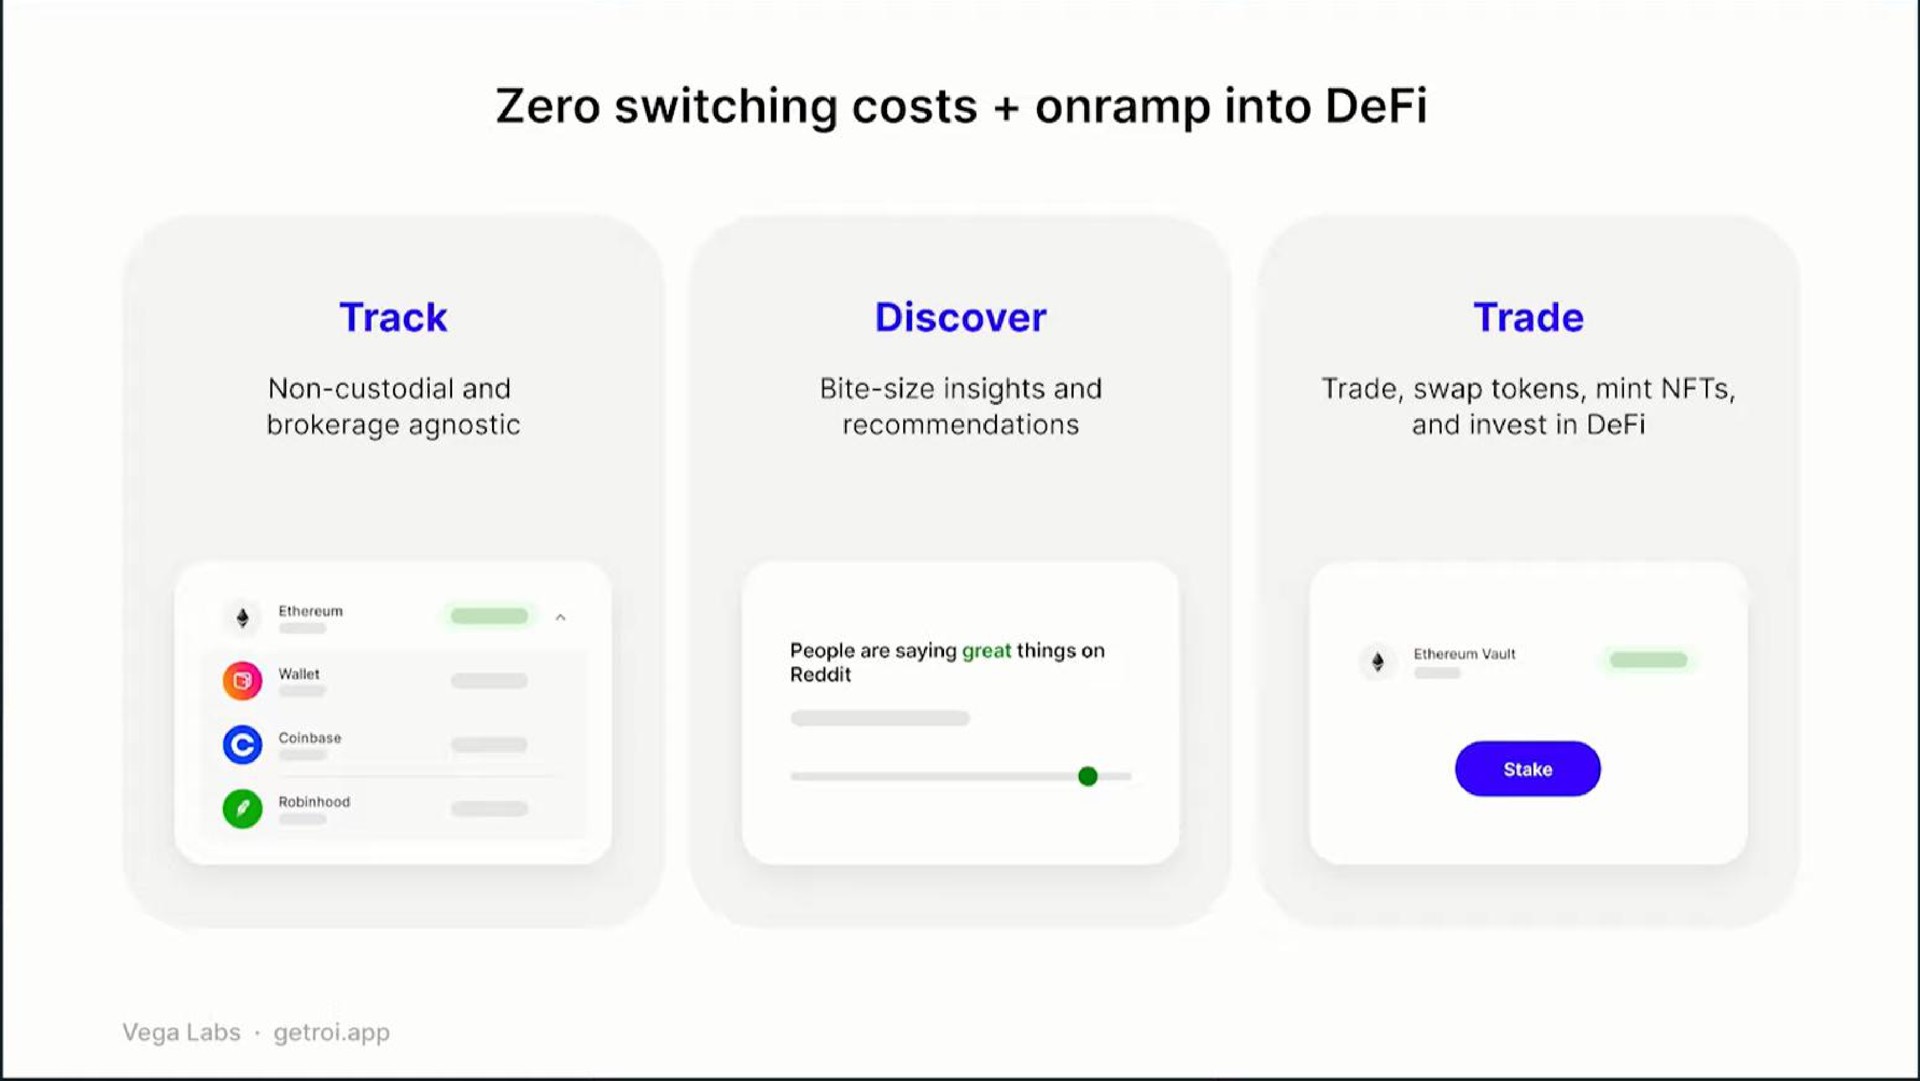 zero switching costs into track discover trade | Vega Labs